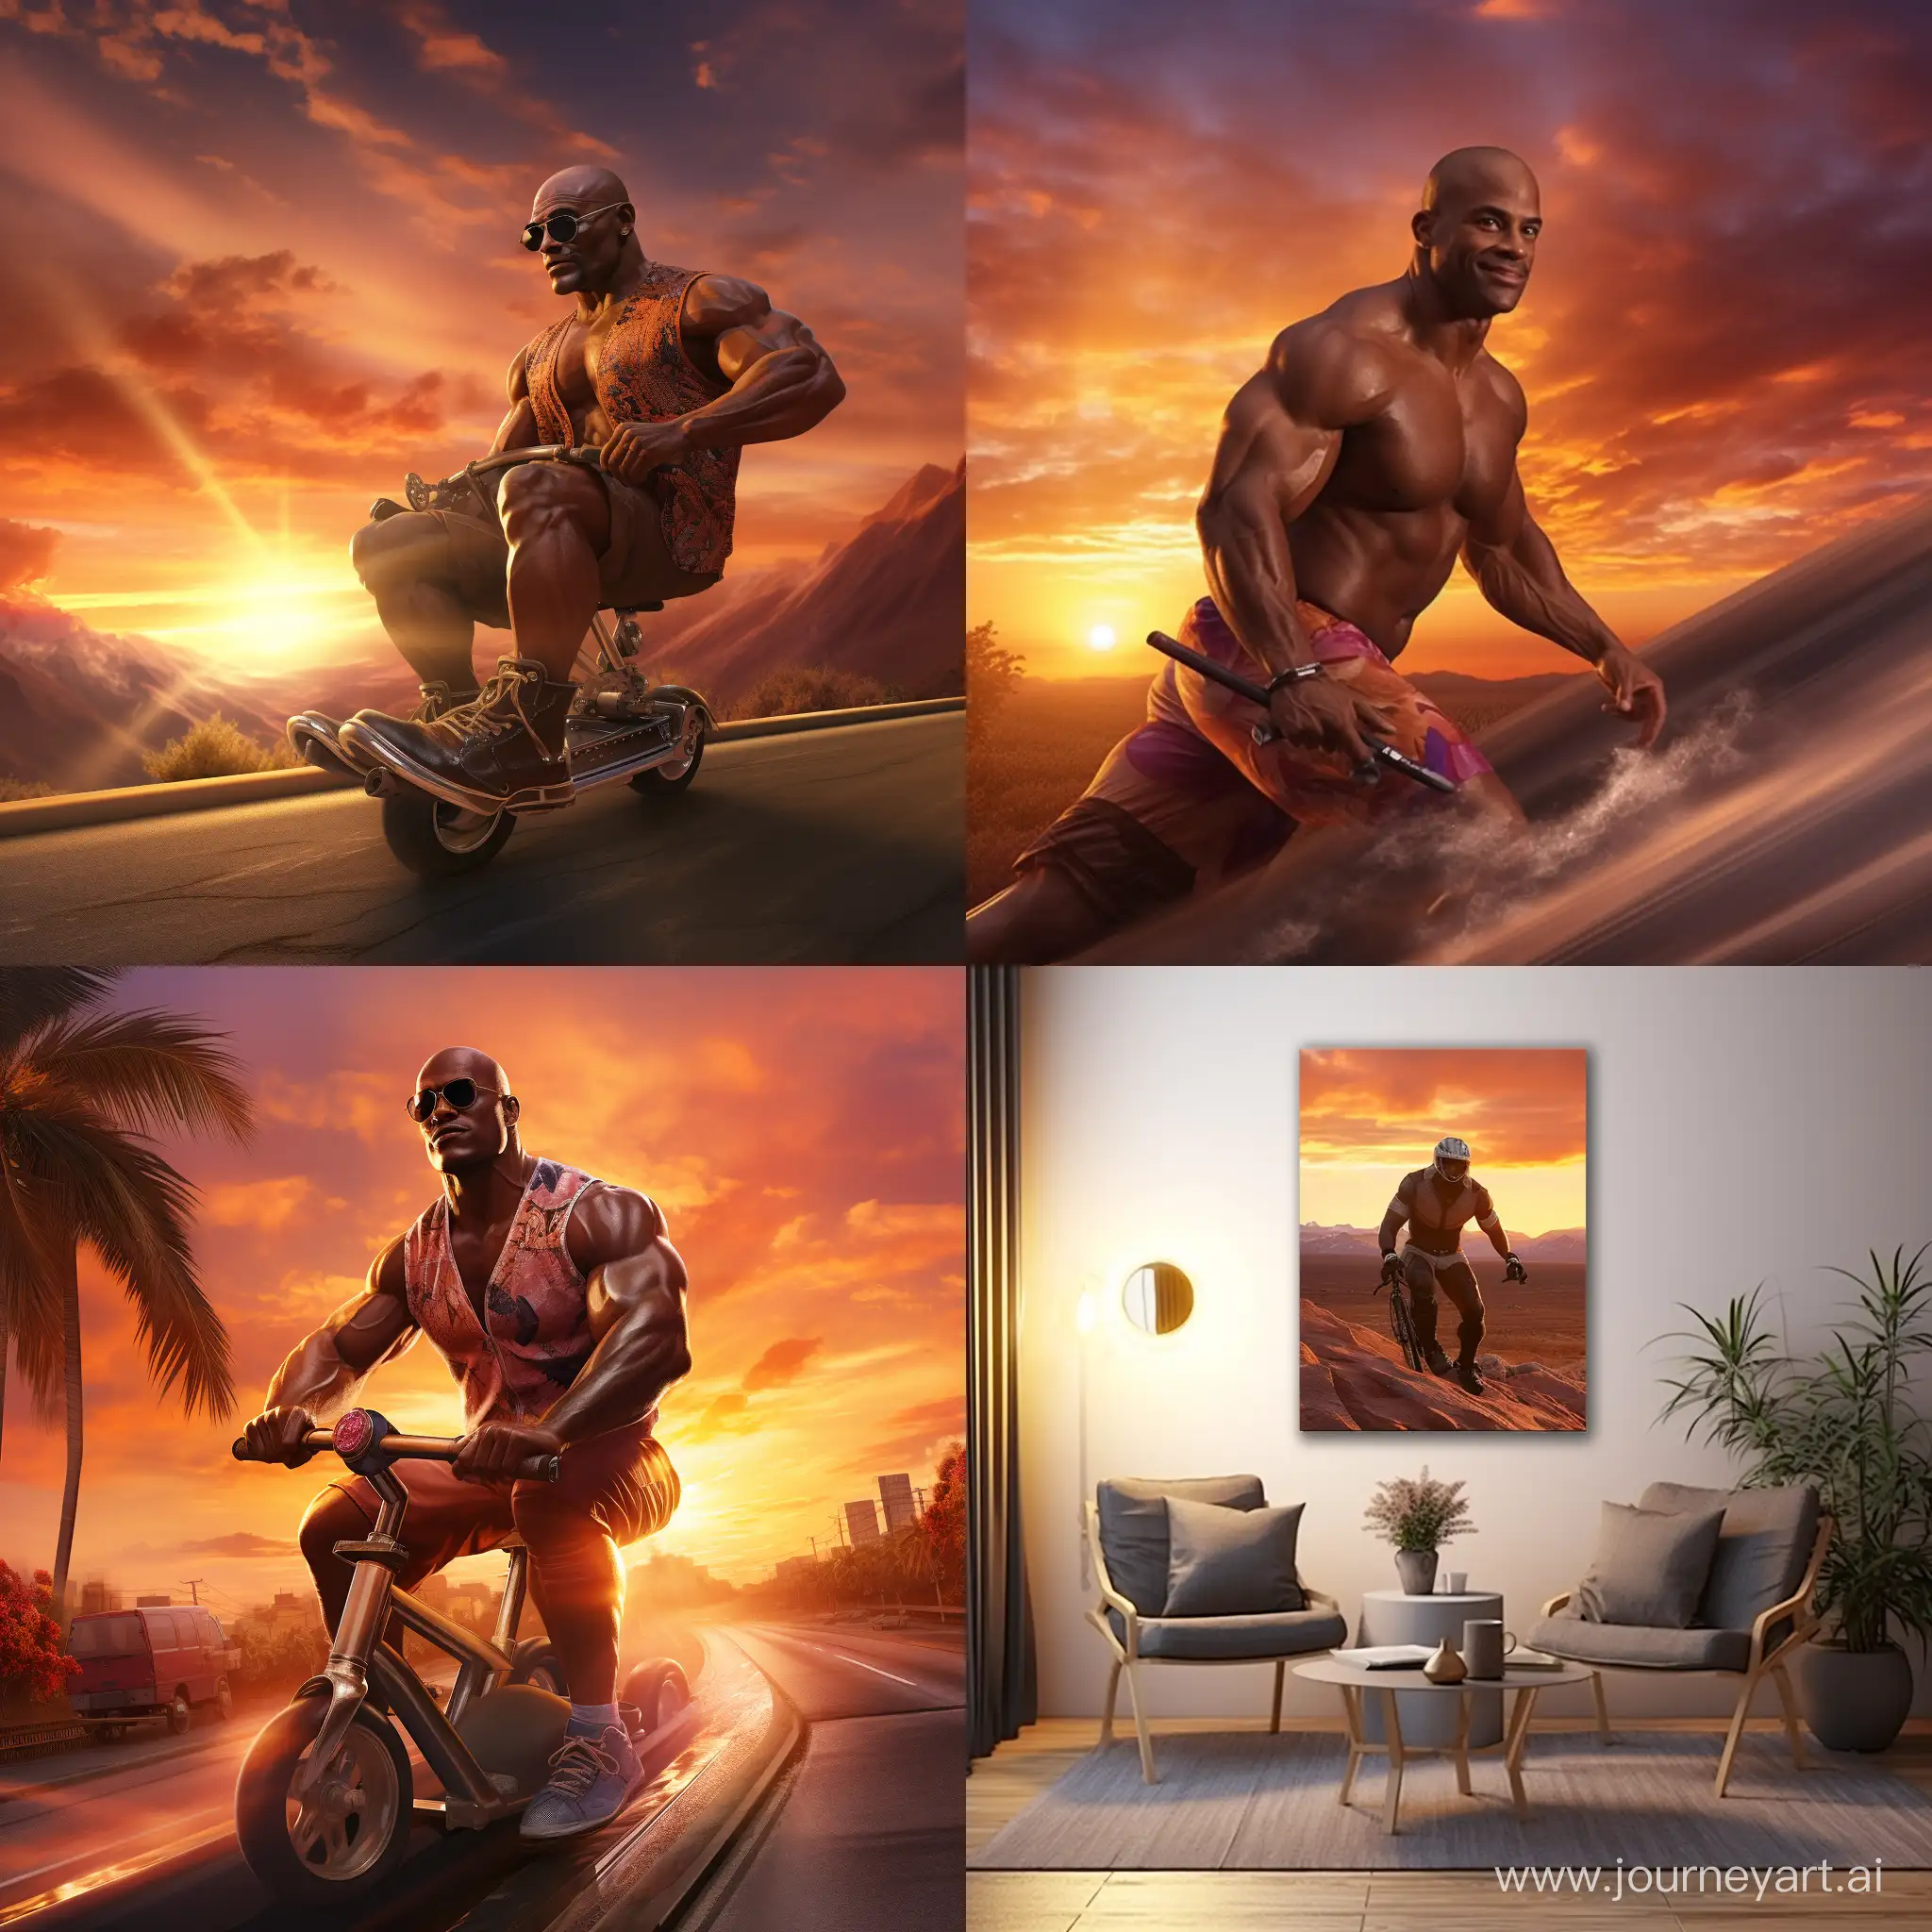 photorealistic image of the bodybuilder ronnie coleman riding a skateboard in front of a sunset